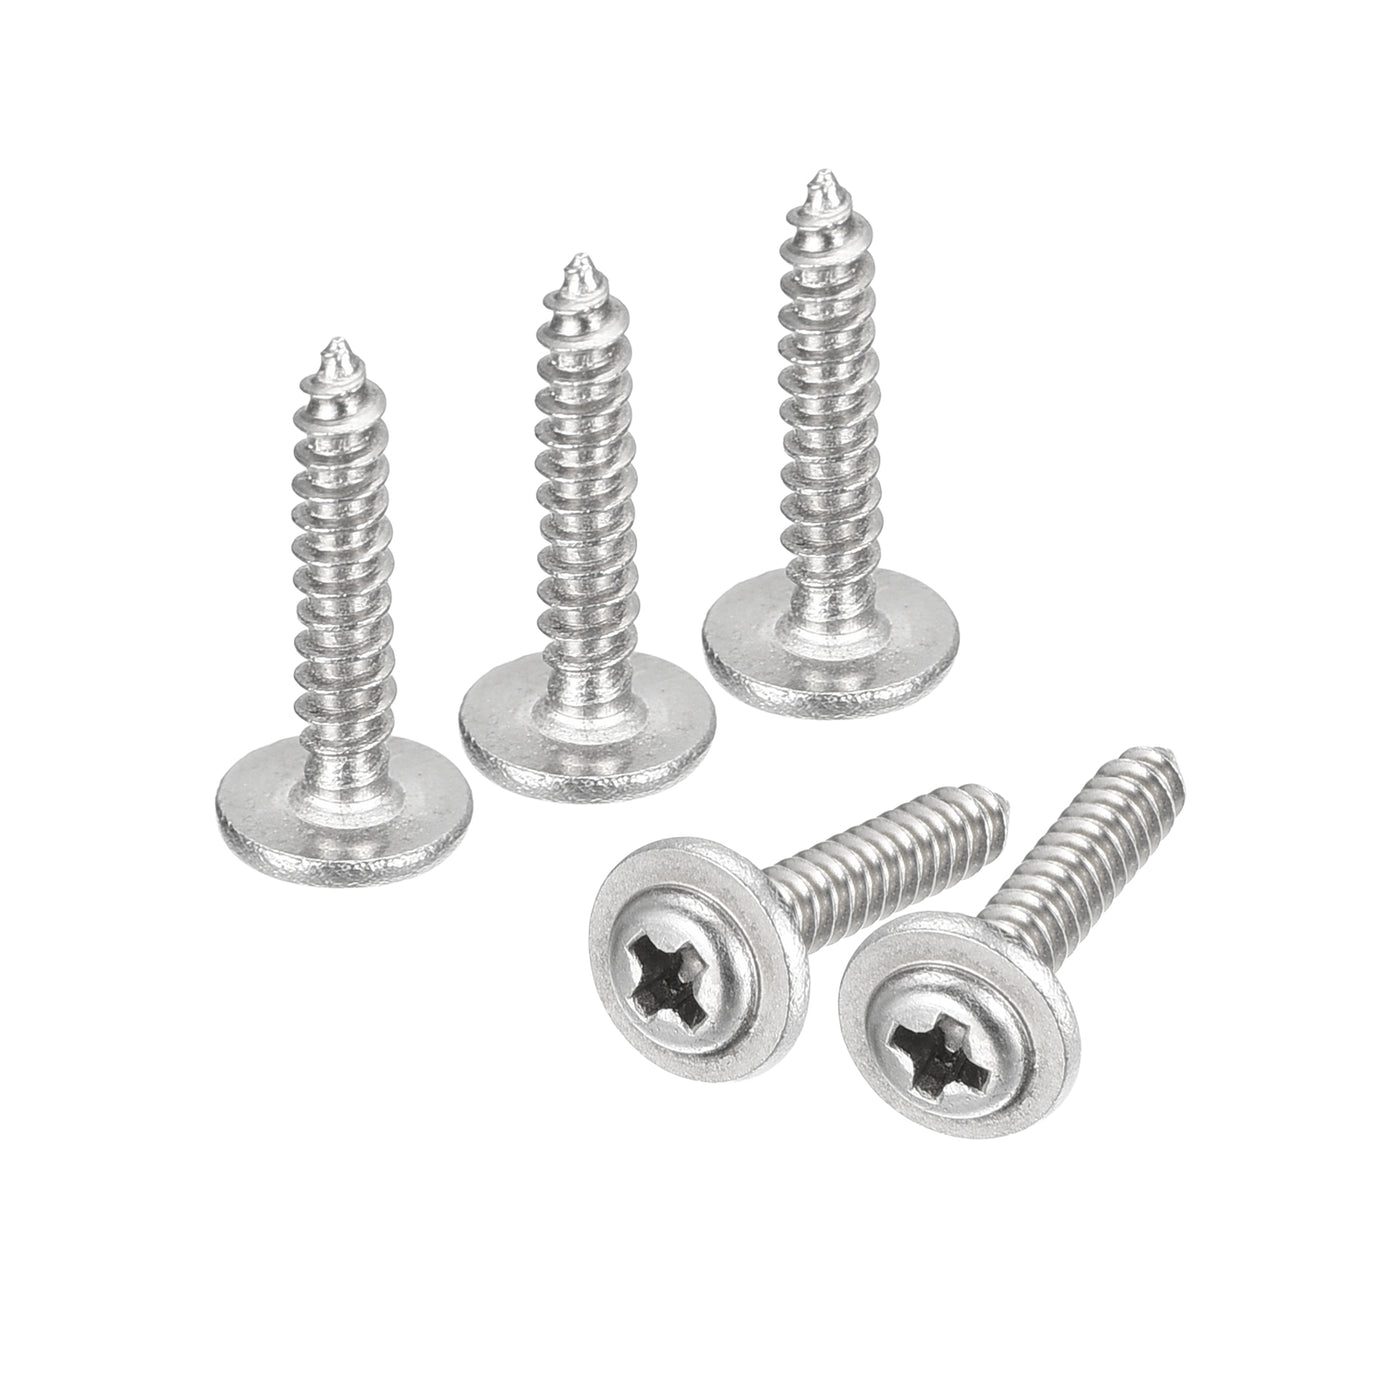 uxcell Uxcell ST2.6x12mm Phillips Pan Head Self-tapping Screw with Washer, 100pcs - 304 Stainless Steel Wood Screw Full Thread (Silver)